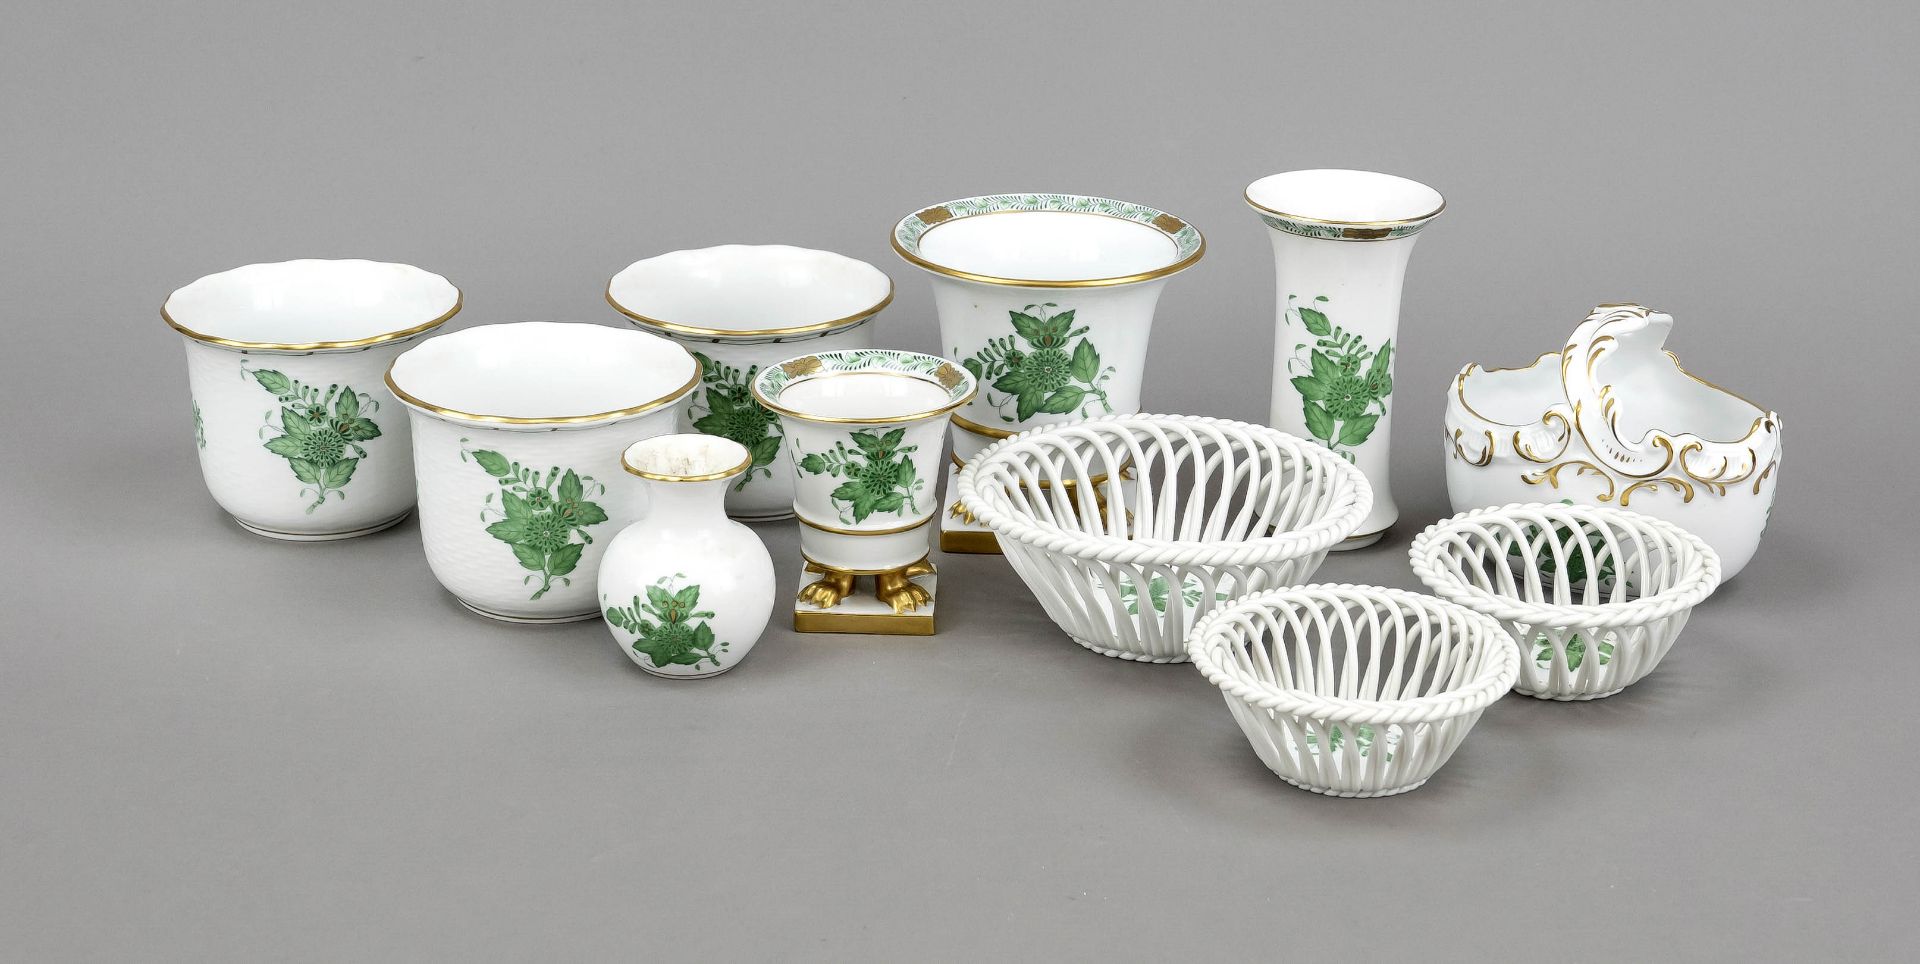 Mixed lot Herend, 11-piece, mark after 1967, Ozier shape, Apponyi decoration in green, ornamental